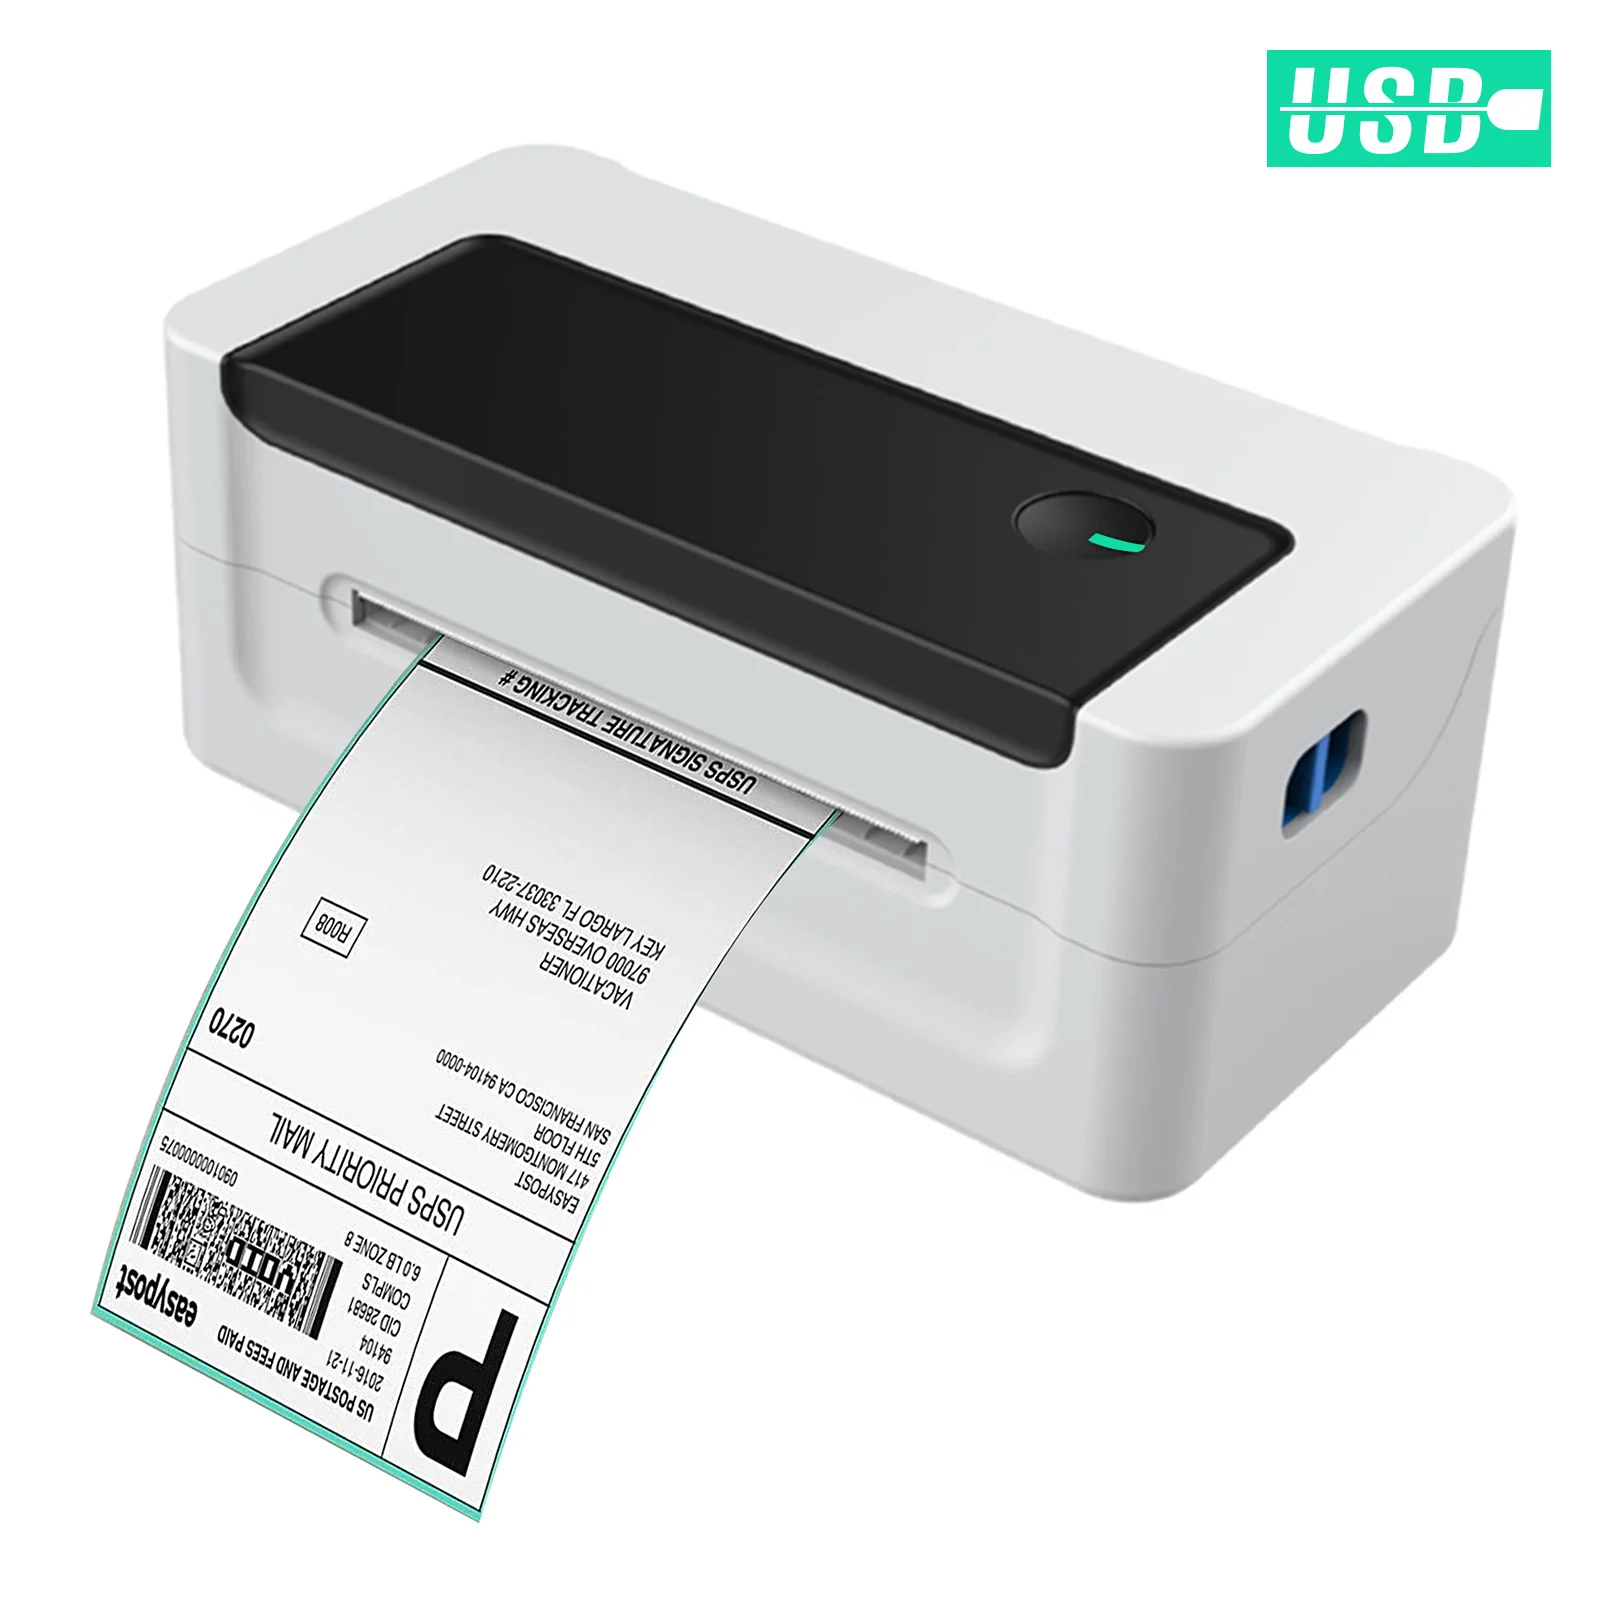 L1081 Protable 150mm/s High Speed Thermal Label Printer Shipping Label 110mm 4*6 Paper Width For Office/Market/Warehouse USB best mini photo printer for iphone Printers